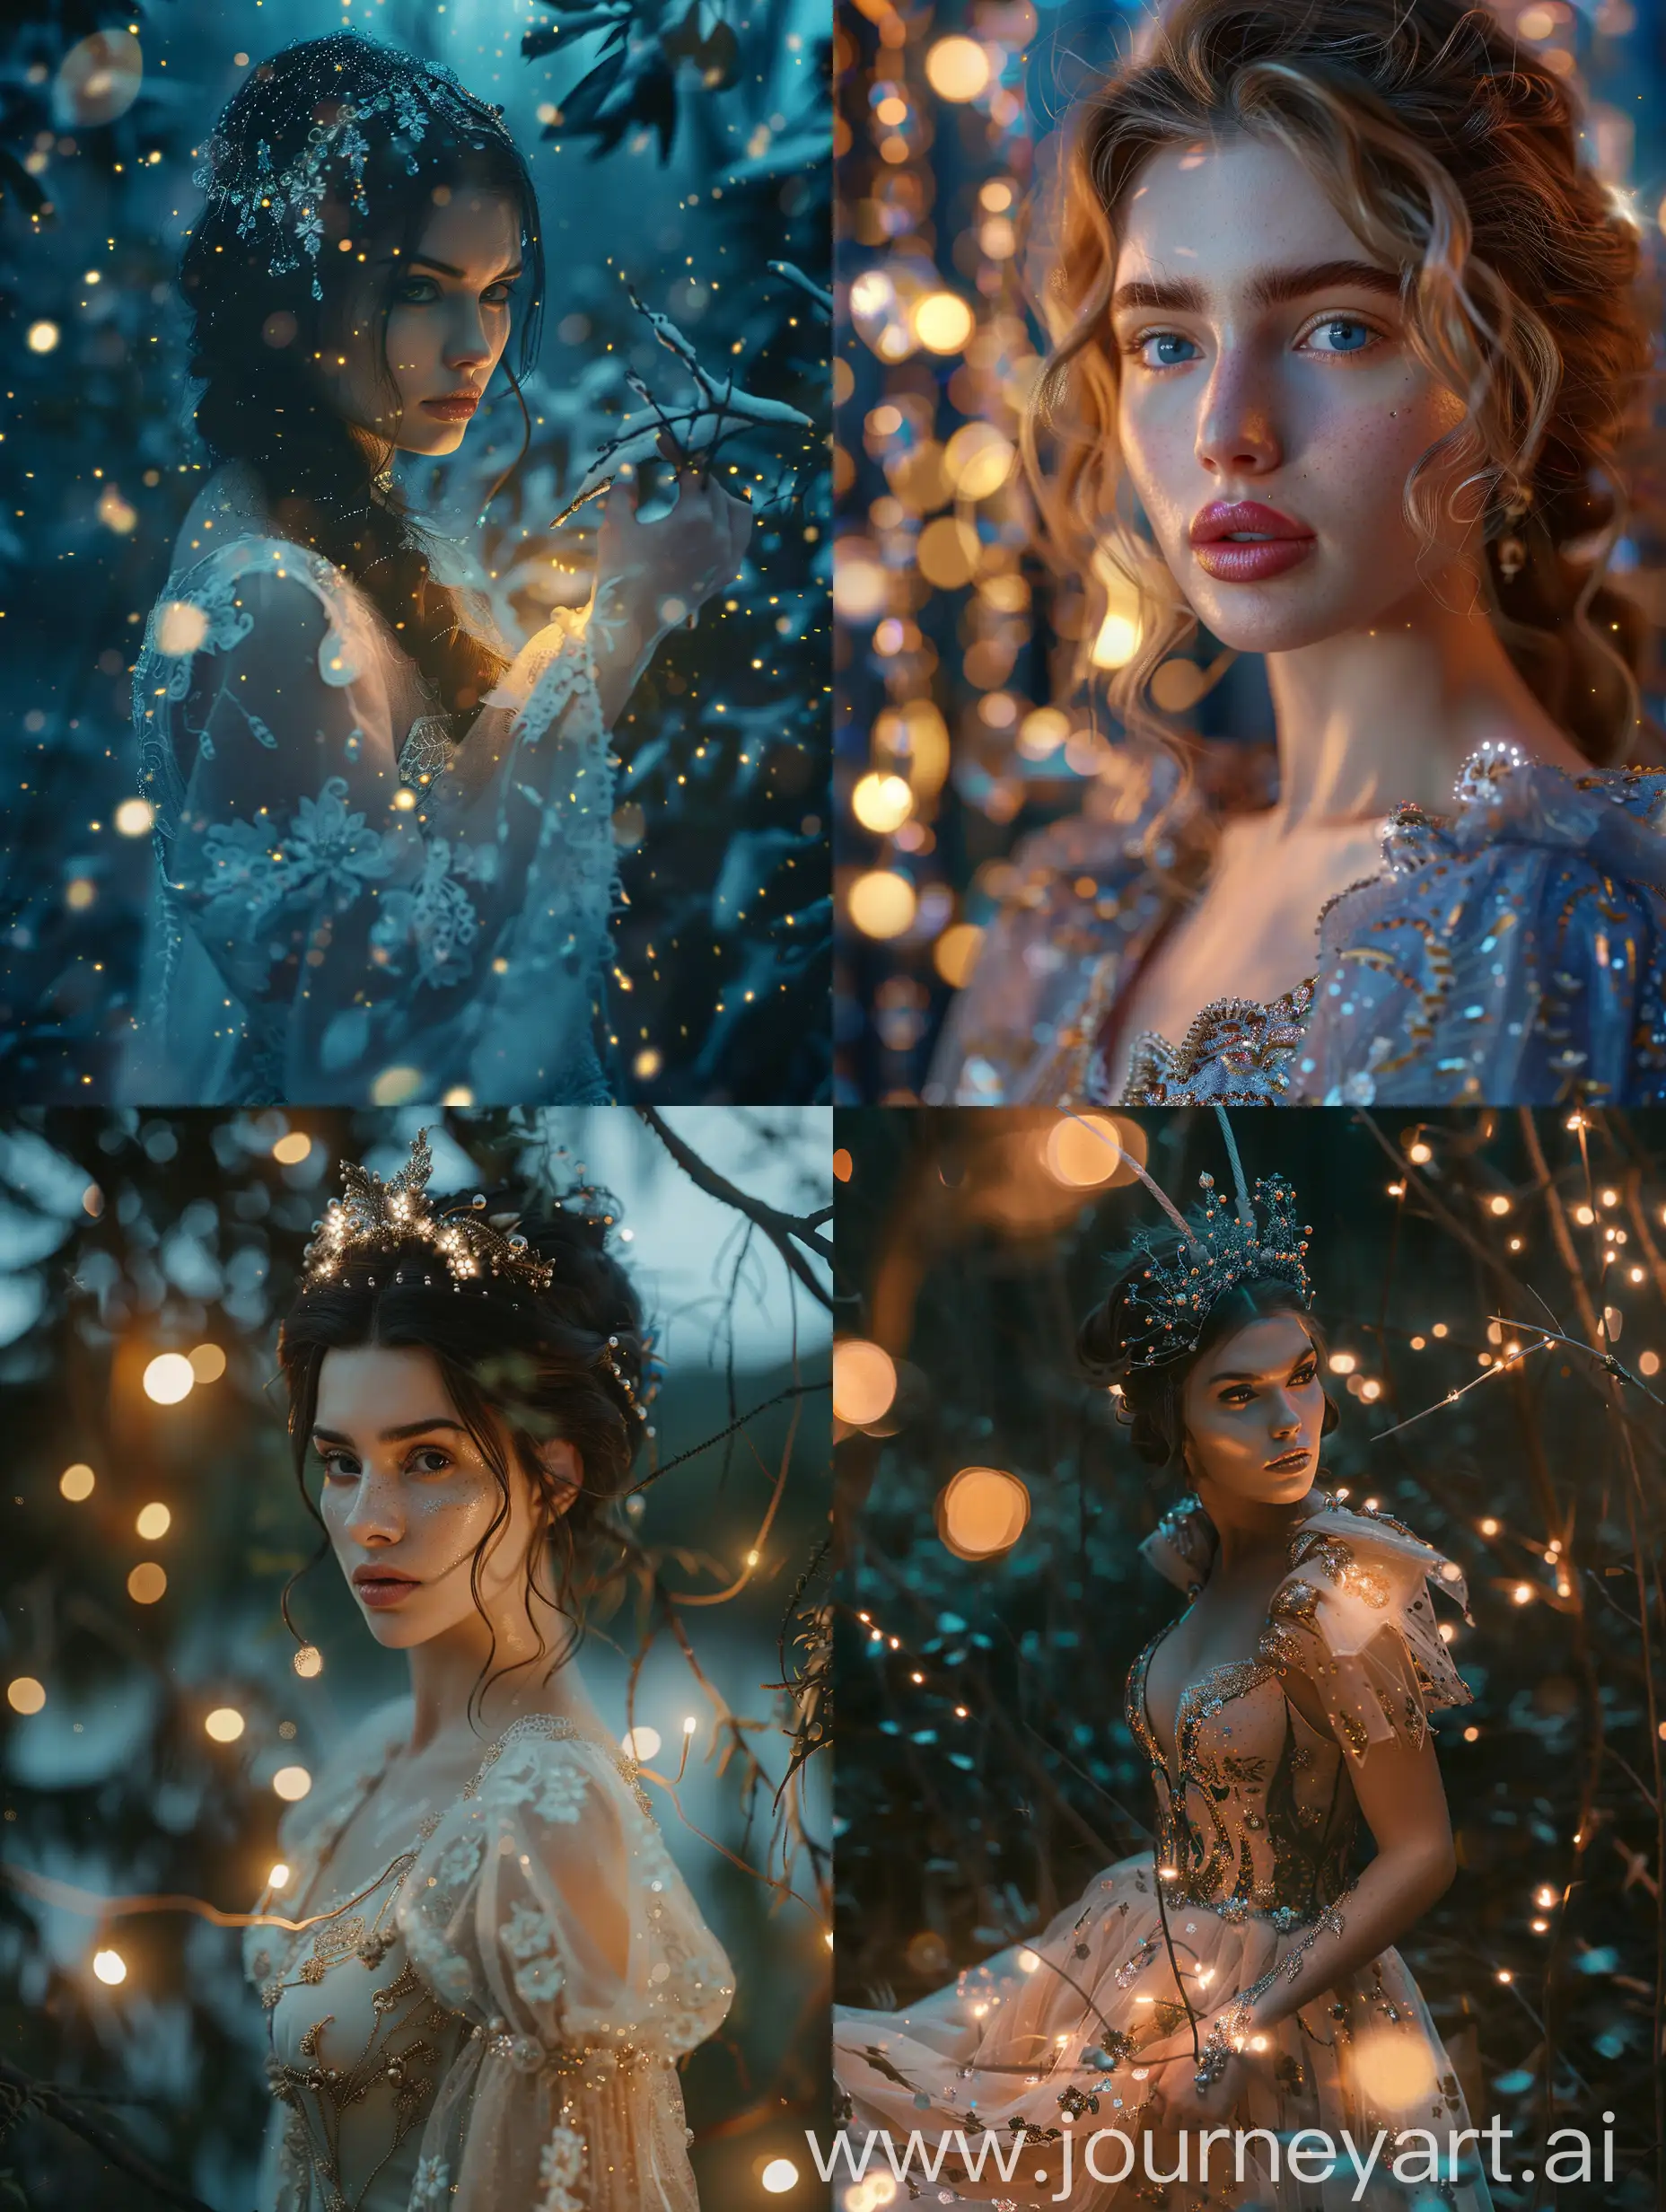 Enchanted-Russian-Princess-in-a-Twilight-Magic-Realm